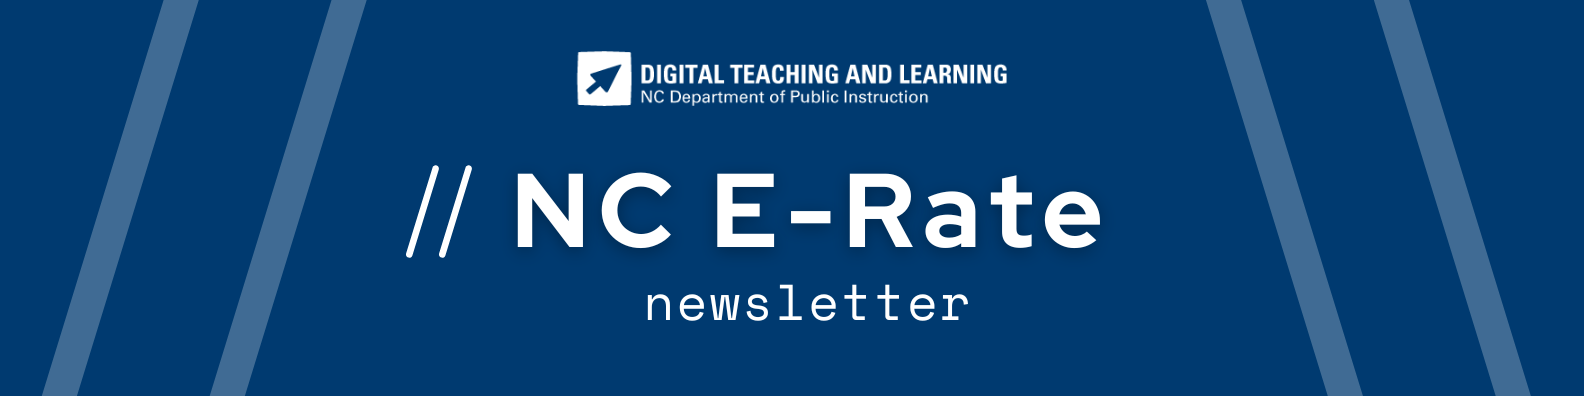 NC E-Rate Newsletter